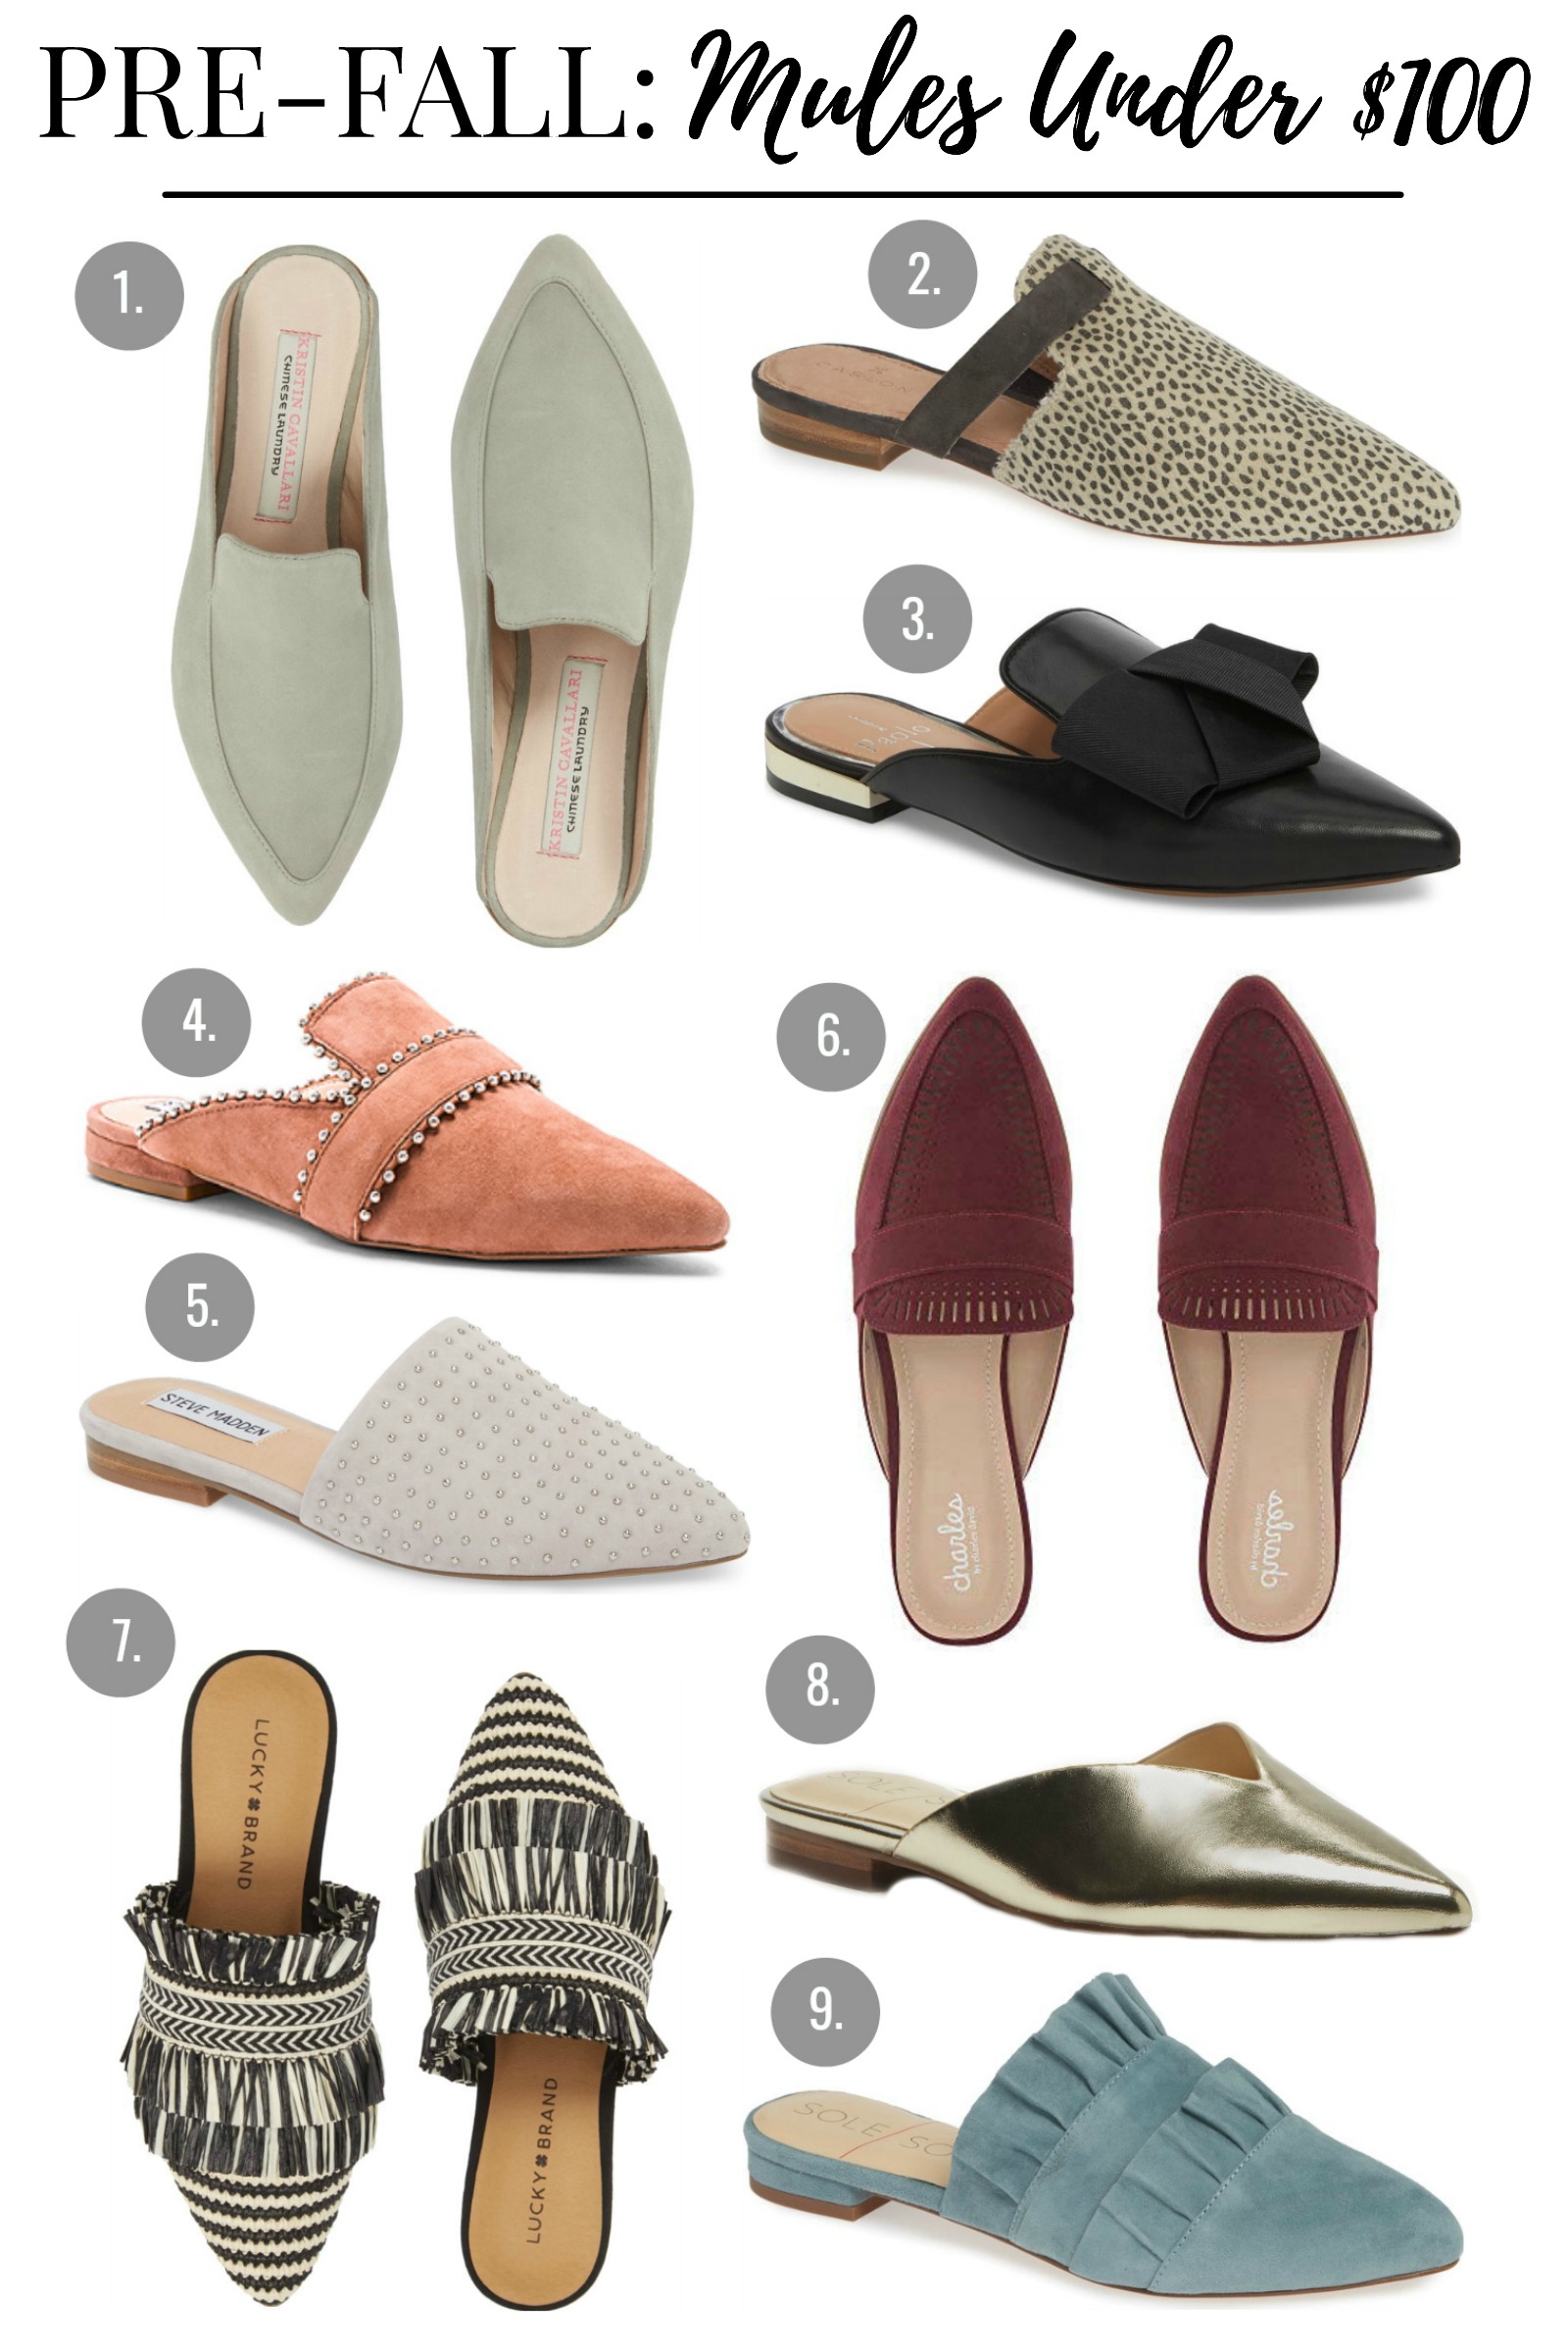 fall mules under 100